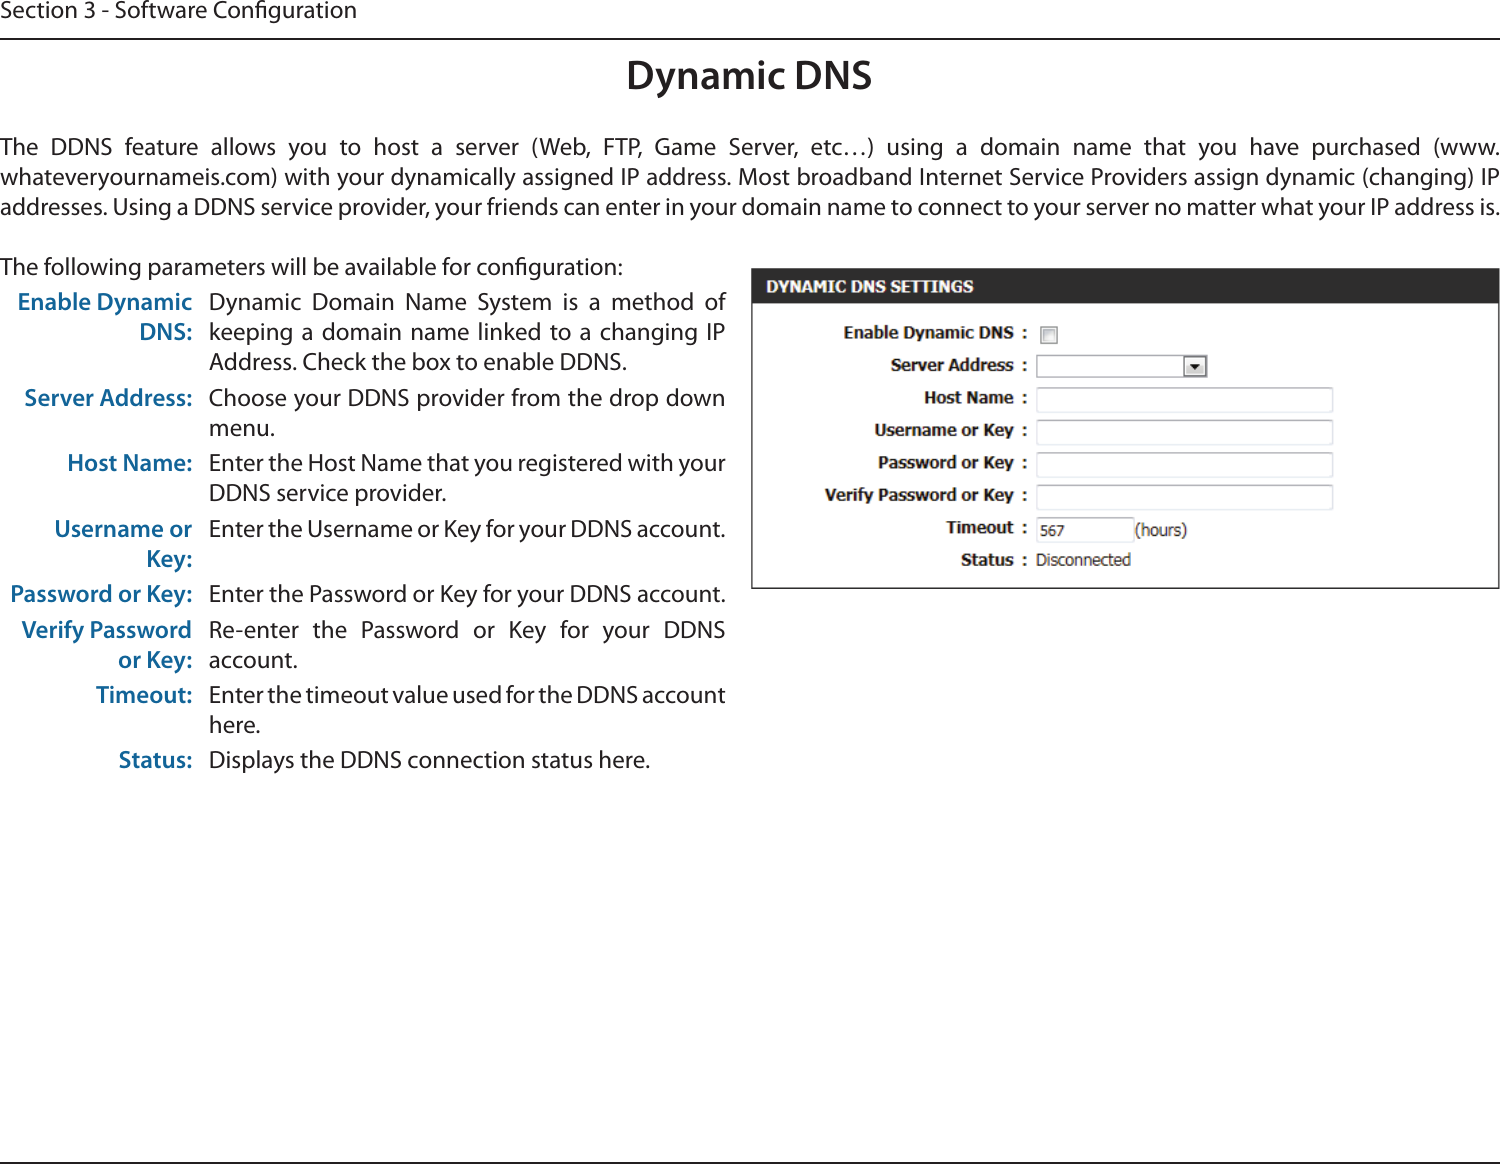 Section 3 - Software CongurationDynamic DNSThe  DDNS  feature  allows  you  to  host  a  server  (Web,  FTP,  Game  Server,  etc…)  using  a  domain  name  that  you  have  purchased  (www.whateveryournameis.com) with your dynamically assigned IP address. Most broadband Internet Service Providers assign dynamic (changing) IP addresses. Using a DDNS service provider, your friends can enter in your domain name to connect to your server no matter what your IP address is.The following parameters will be available for conguration:Enable Dynamic DNS:Dynamic  Domain  Name  System  is  a  method  of keeping a  domain  name  linked  to  a changing IP Address. Check the box to enable DDNS.Server Address: Choose your DDNS provider from the drop down menu.Host Name: Enter the Host Name that you registered with your DDNS service provider.Username or Key:Enter the Username or Key for your DDNS account.Password or Key: Enter the Password or Key for your DDNS account.Verify Password or Key:Re-enter  the  Password  or  Key  for  your  DDNS account.Timeout: Enter the timeout value used for the DDNS account here.Status: Displays the DDNS connection status here.